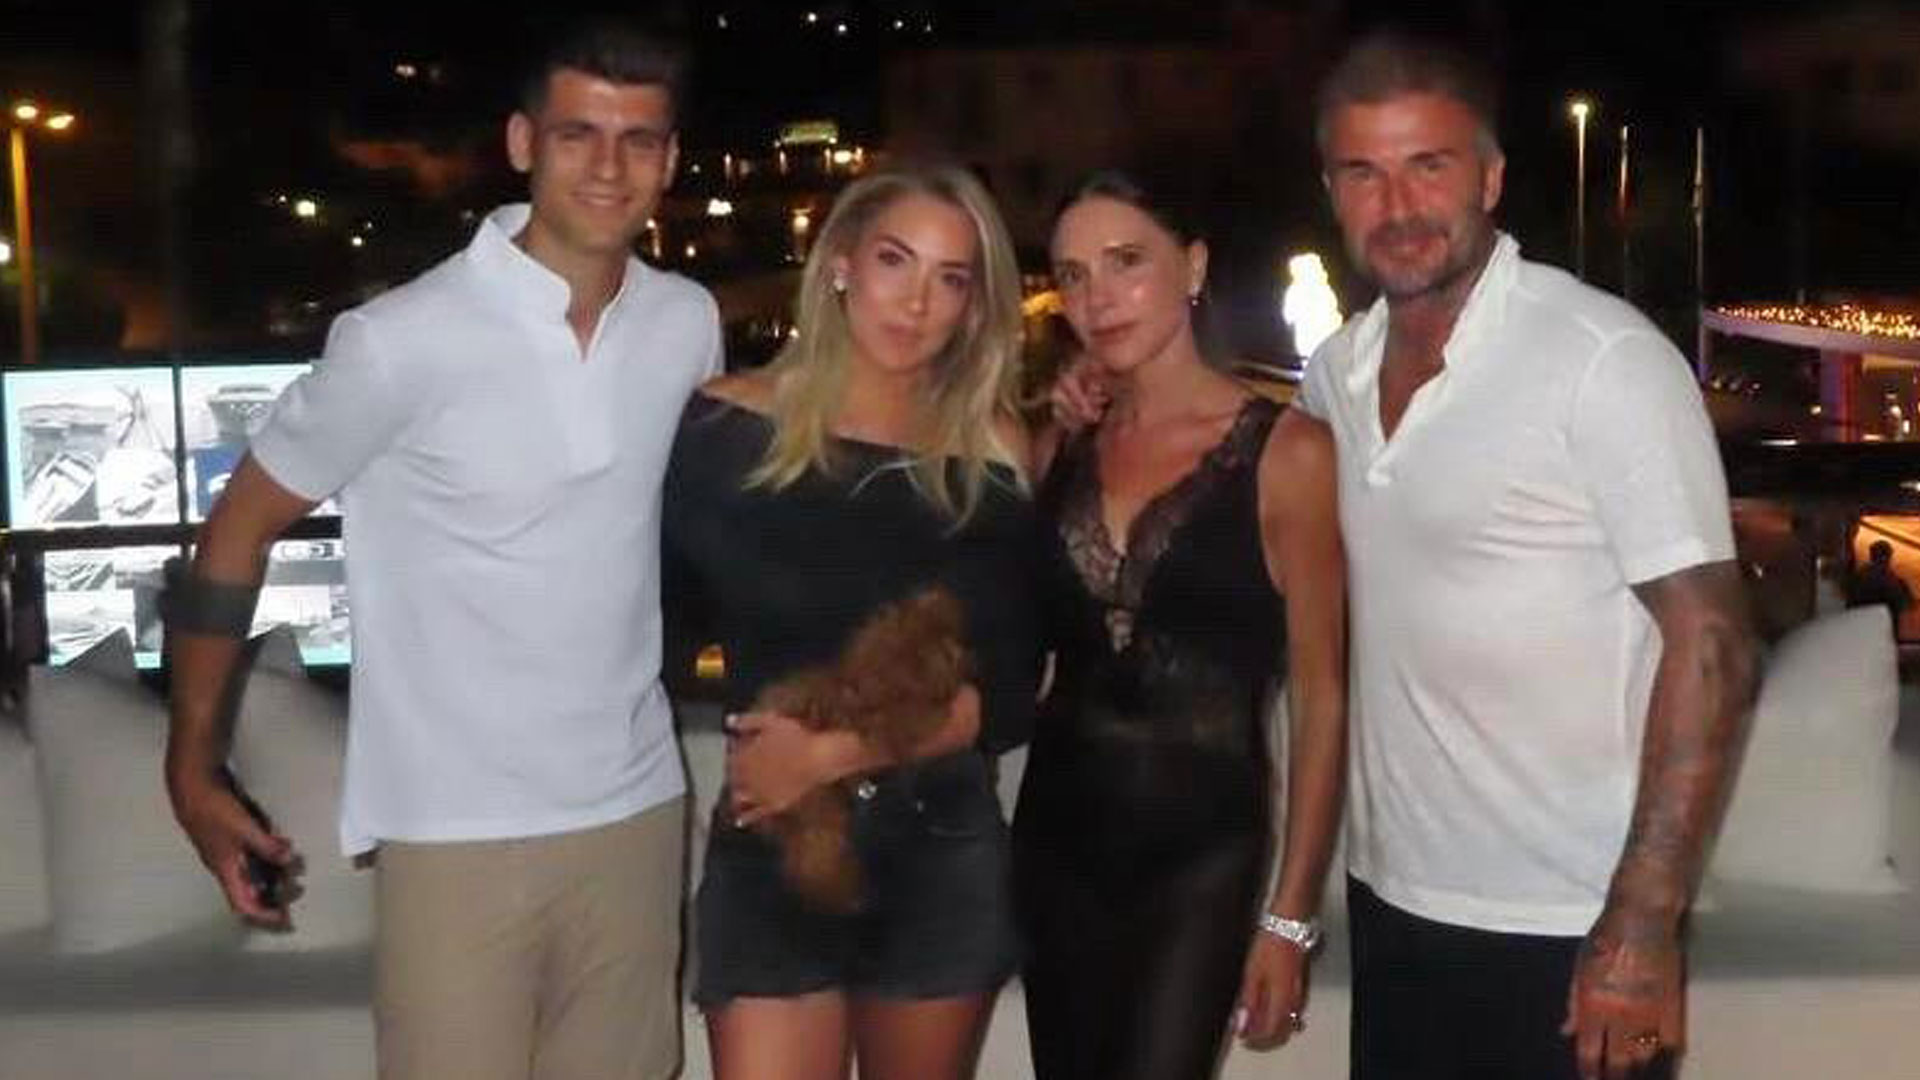 Morata and his Wag have ‘beautiful night’ with England icon Beckham and wife Victoria – and Danny Drinkwater approves [Video]